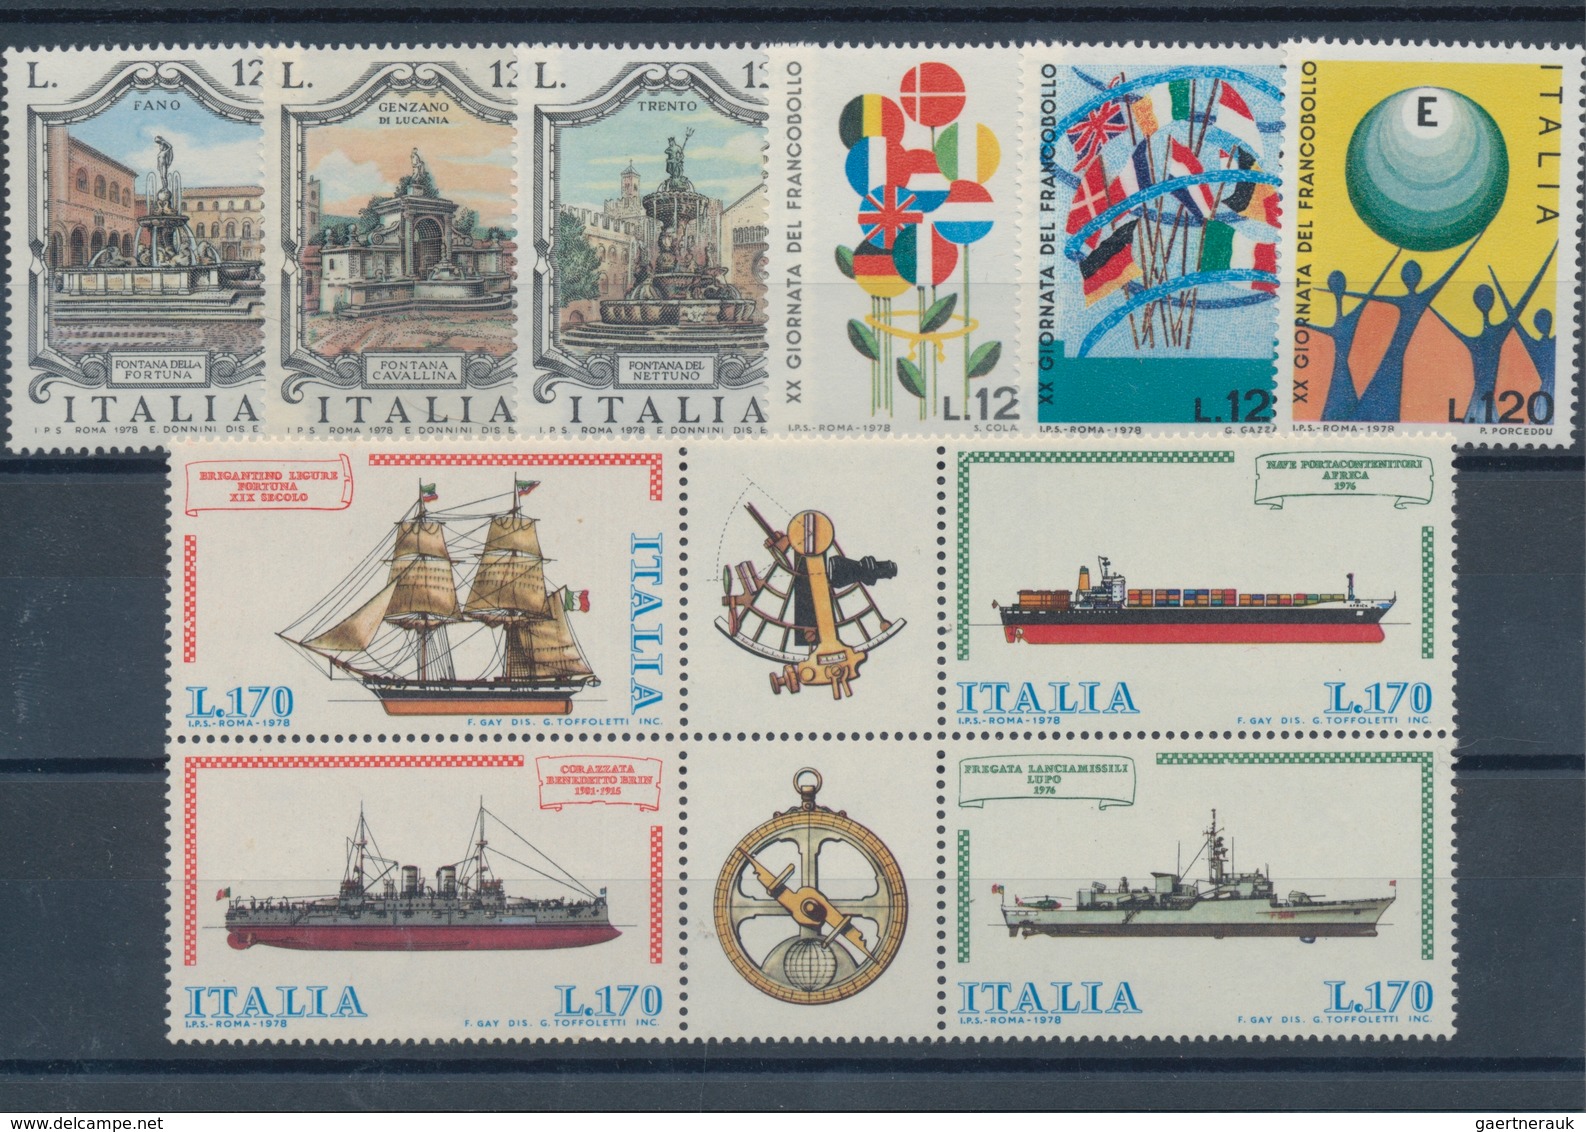 Italien: 1970/1979, year sets MNH per 100, seem to be complete. Every year set is sorted on stockcar